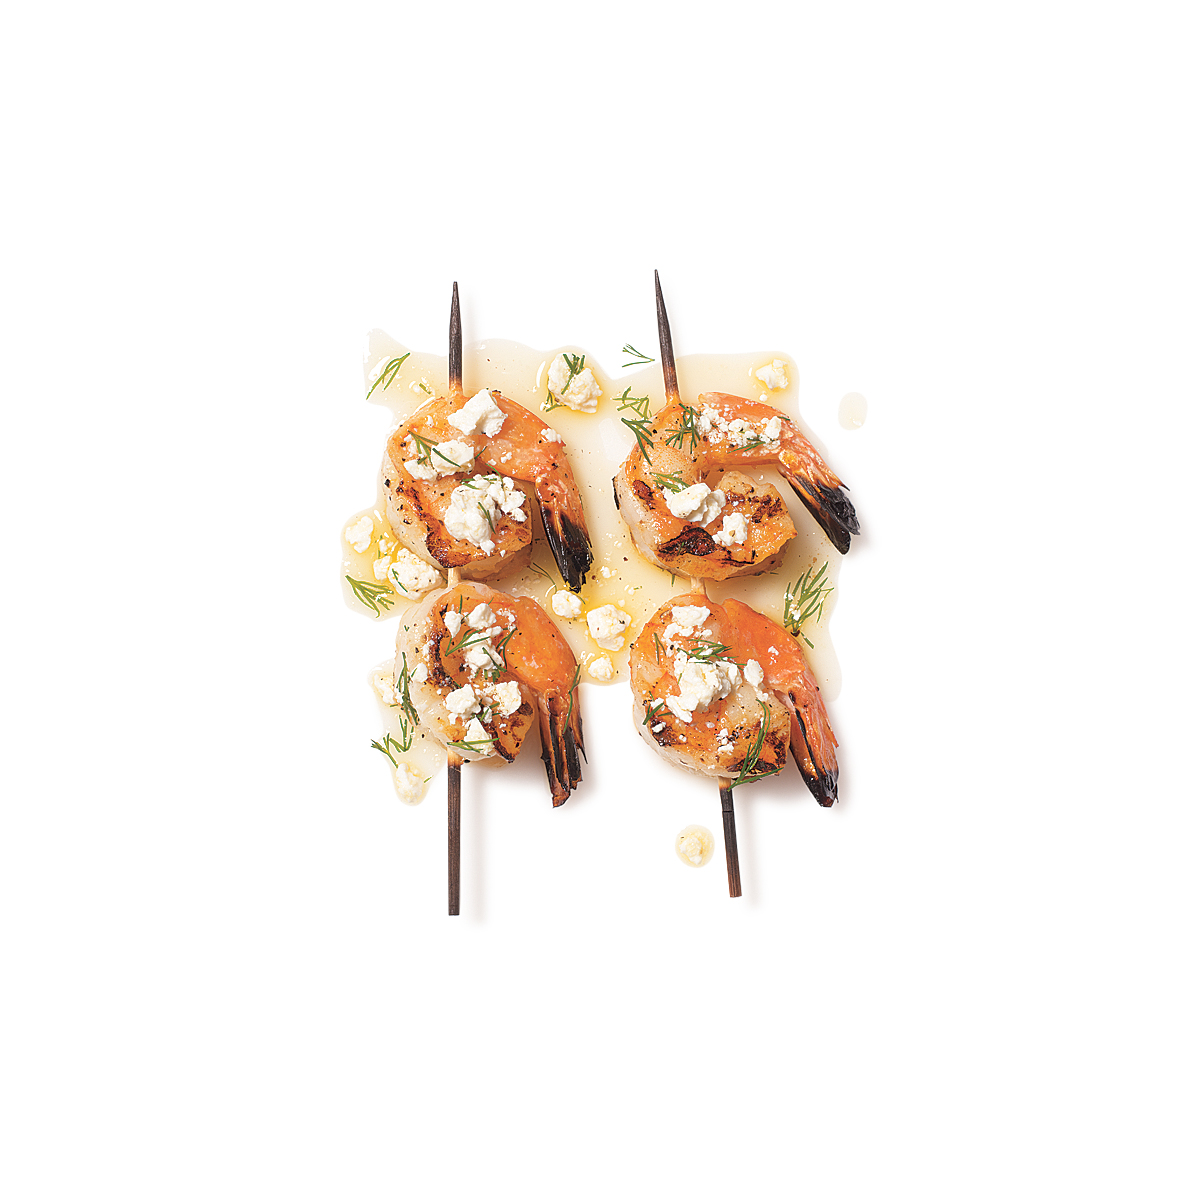 Shrimp Skewers with Dill and Feta